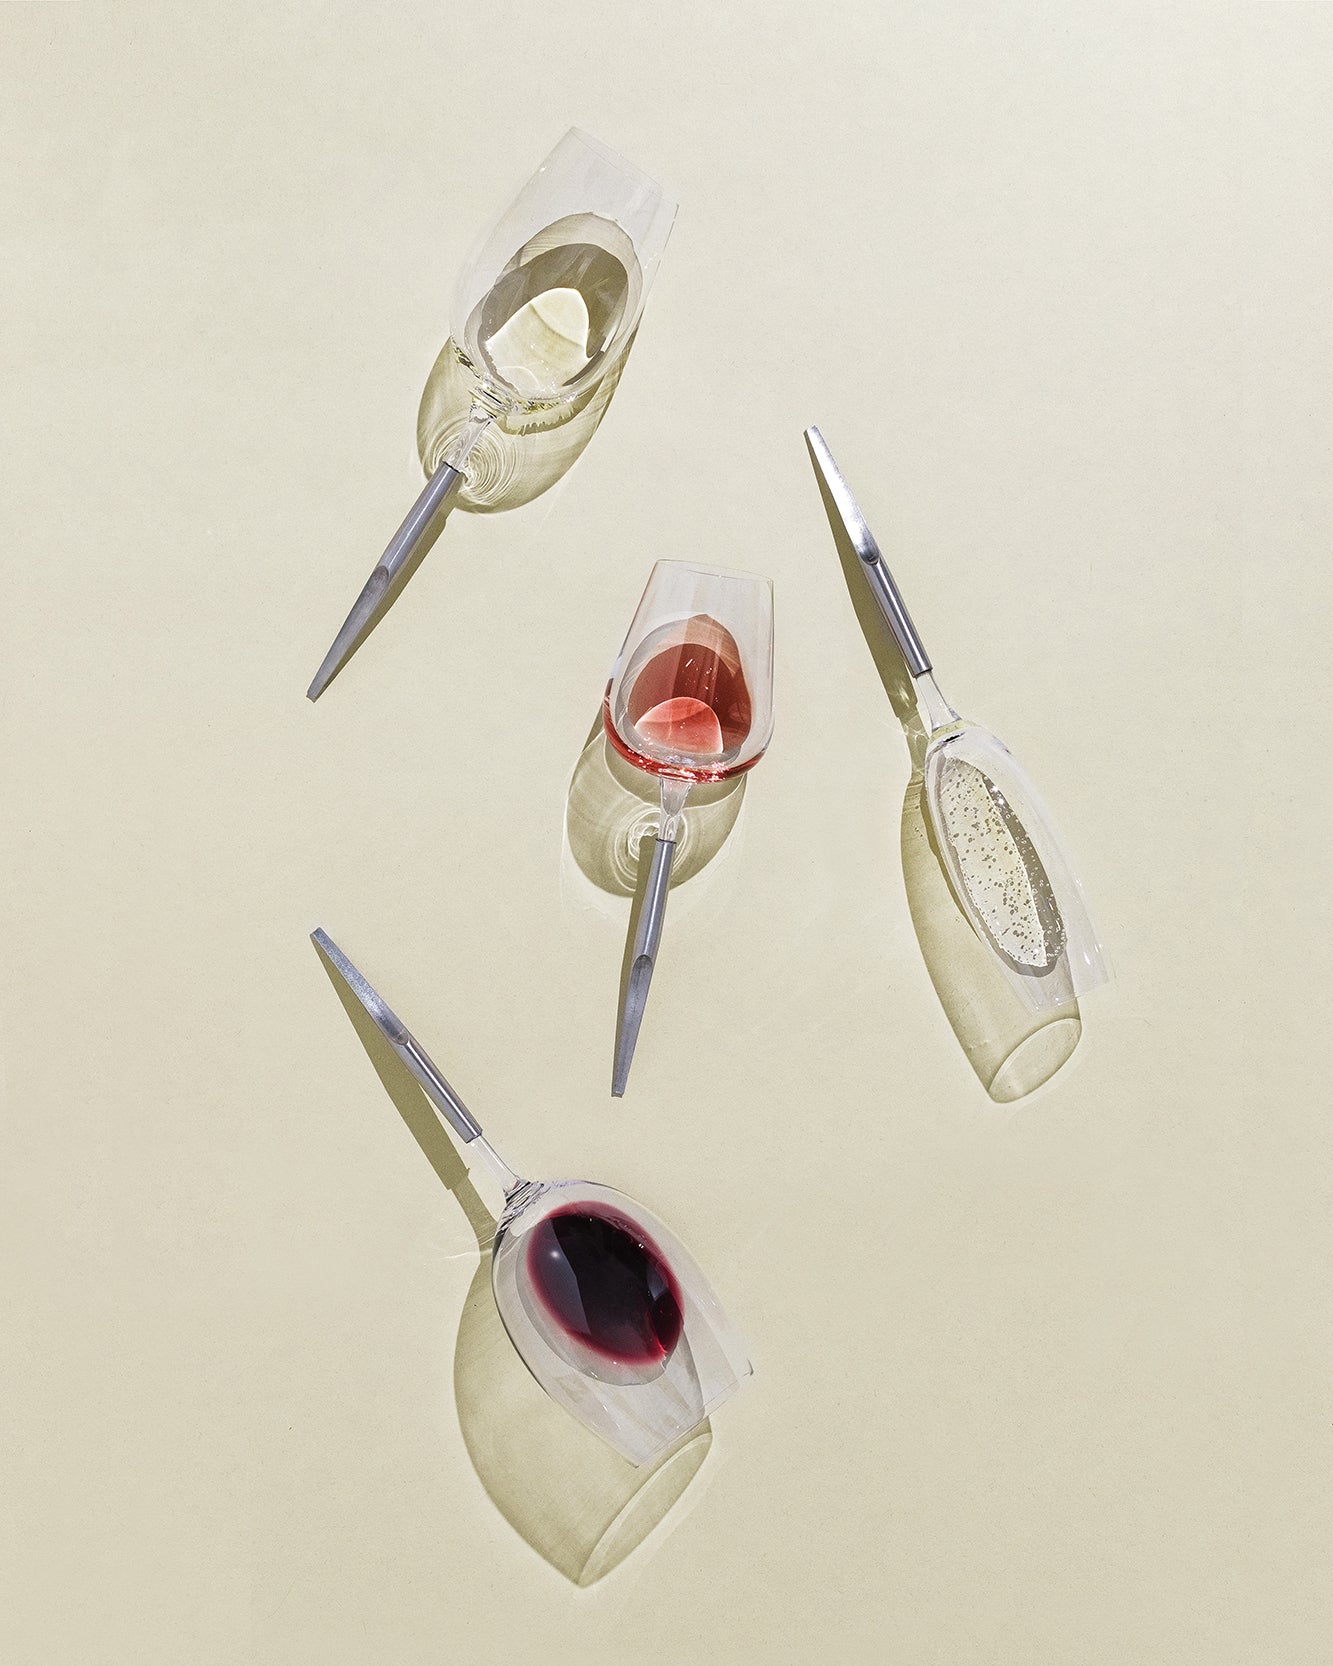 picnic wine glasses with metal pins, half full laying horizontally on neutral background